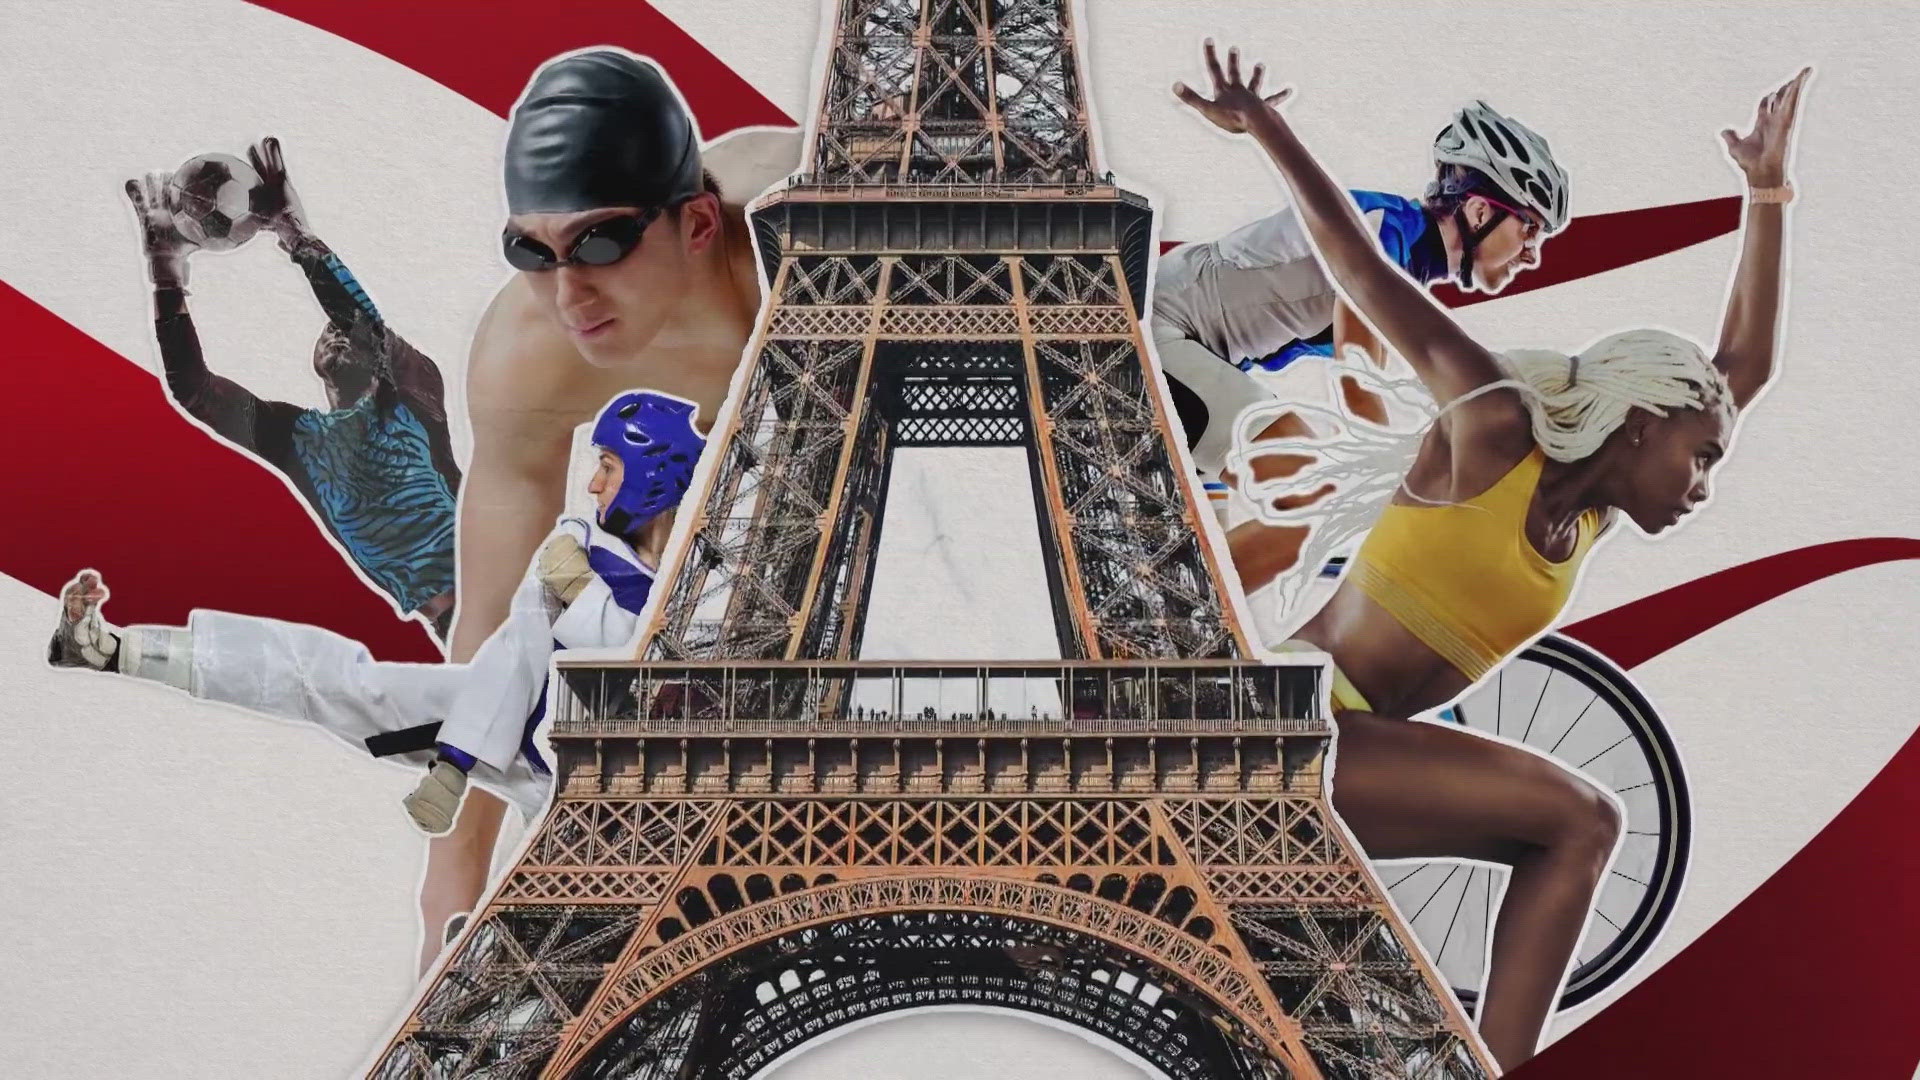 If you're hoping to go to the Paris Olympics, you'll need to book your flight soon. Roundtrip tickets from Lambert Airport in St. Louis come in around $1,000.